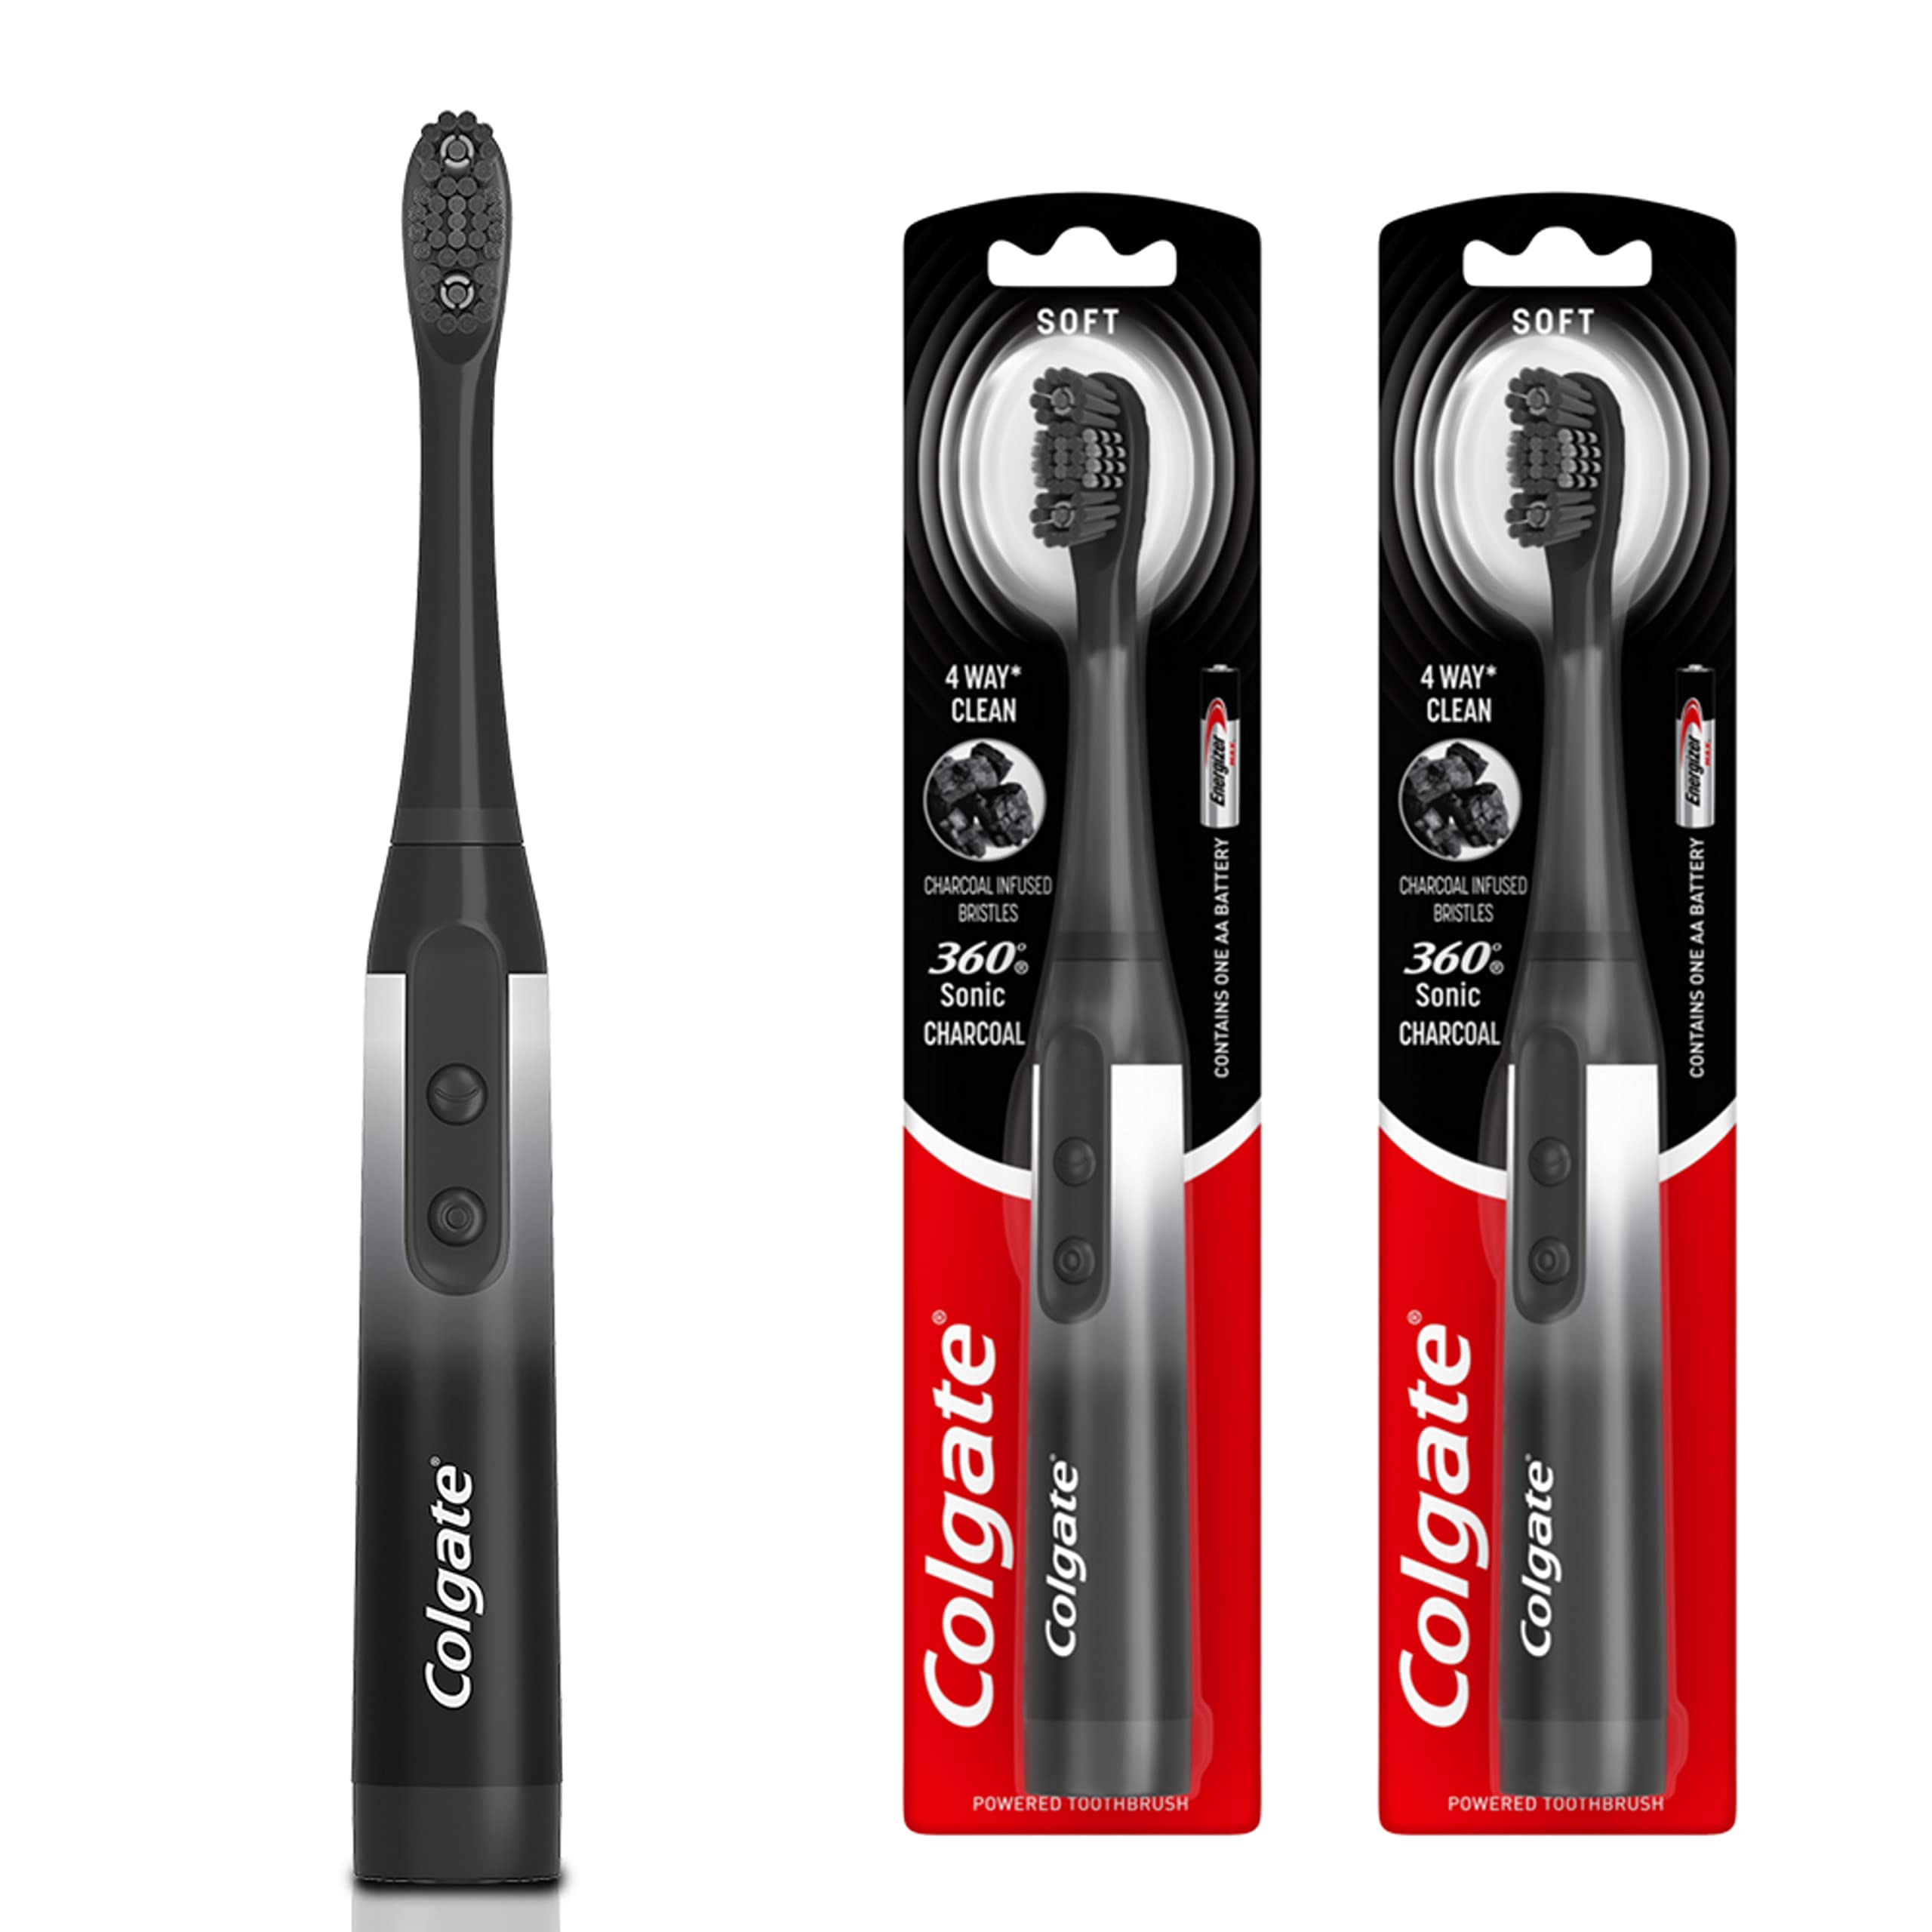 Select Amazon Accounts: 2-Pack Colgate 360 Charcoal Sonic Powered Battery Toothbrush $4 ($2 each) + Free Shipping w/ Prime or on $35+